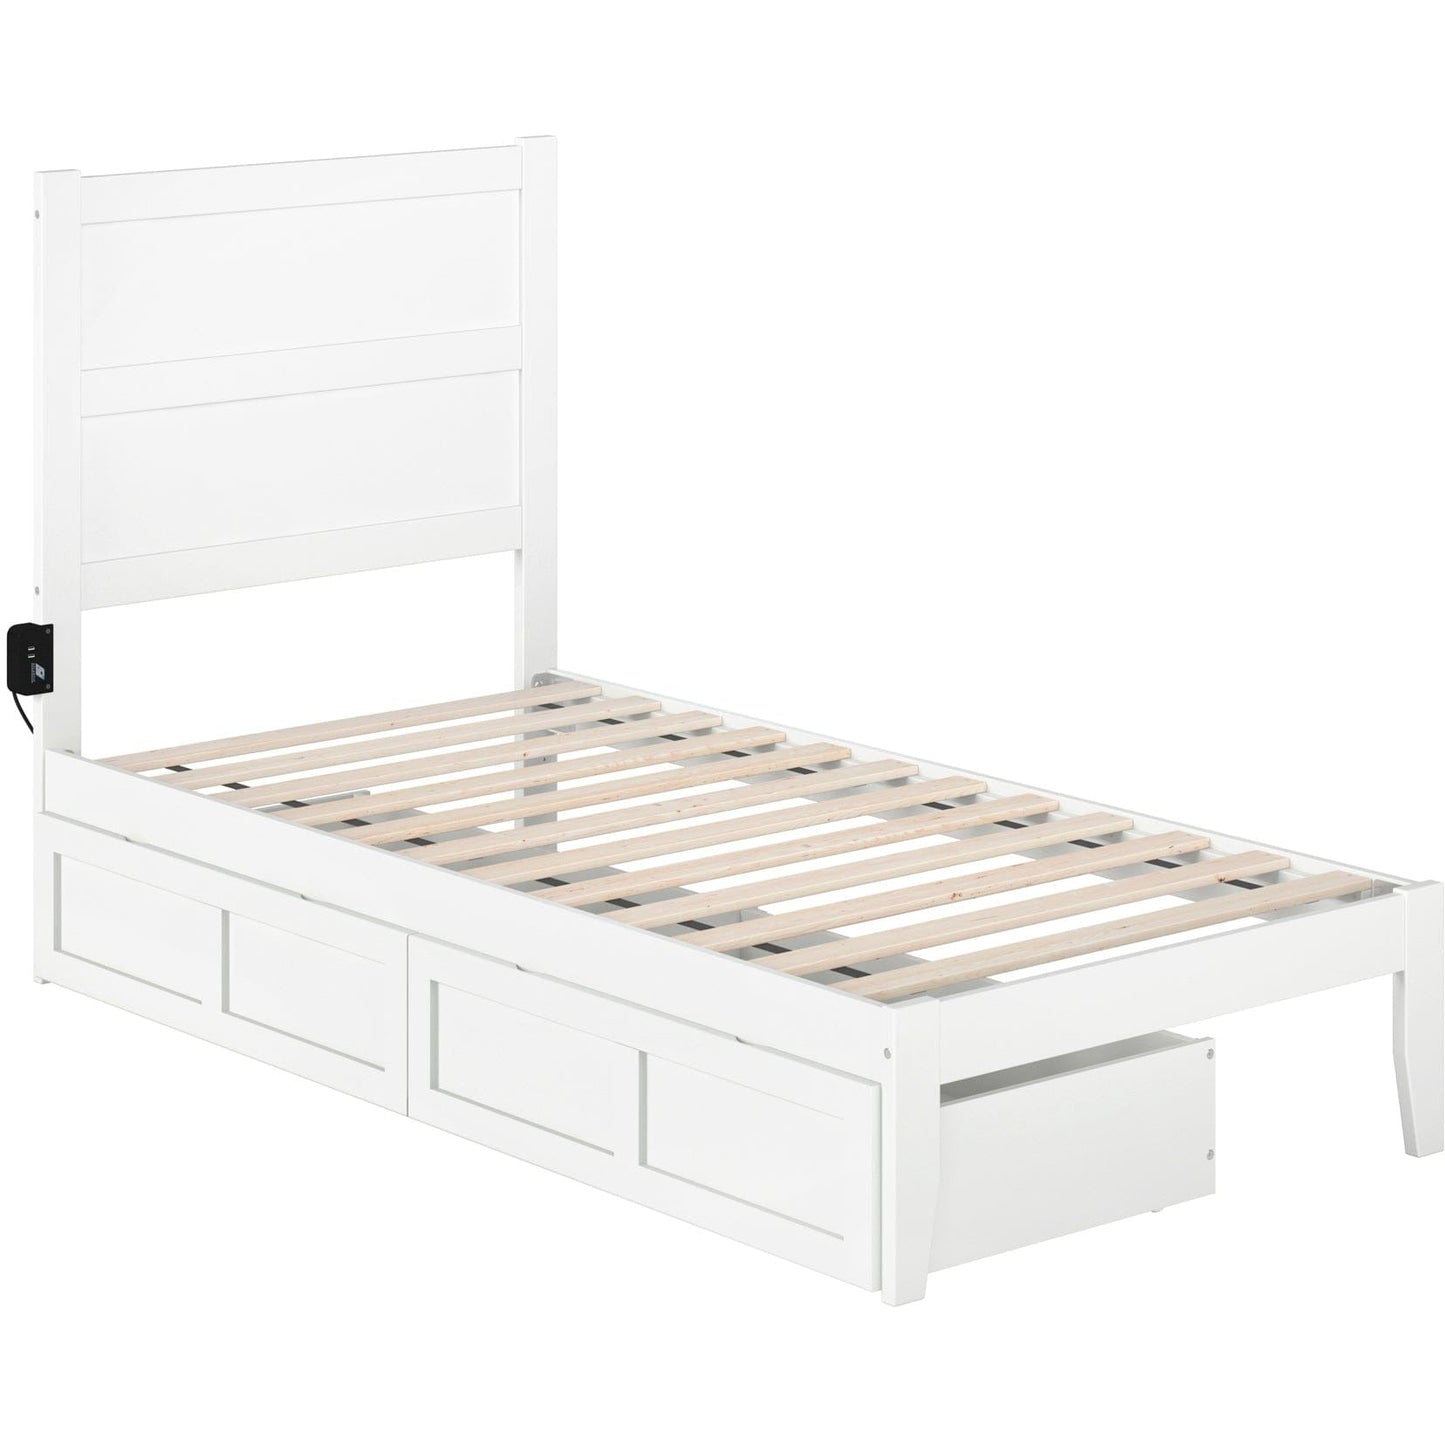 AFI Furnishings NoHo Twin Bed with 2 Drawers in White AG9113322